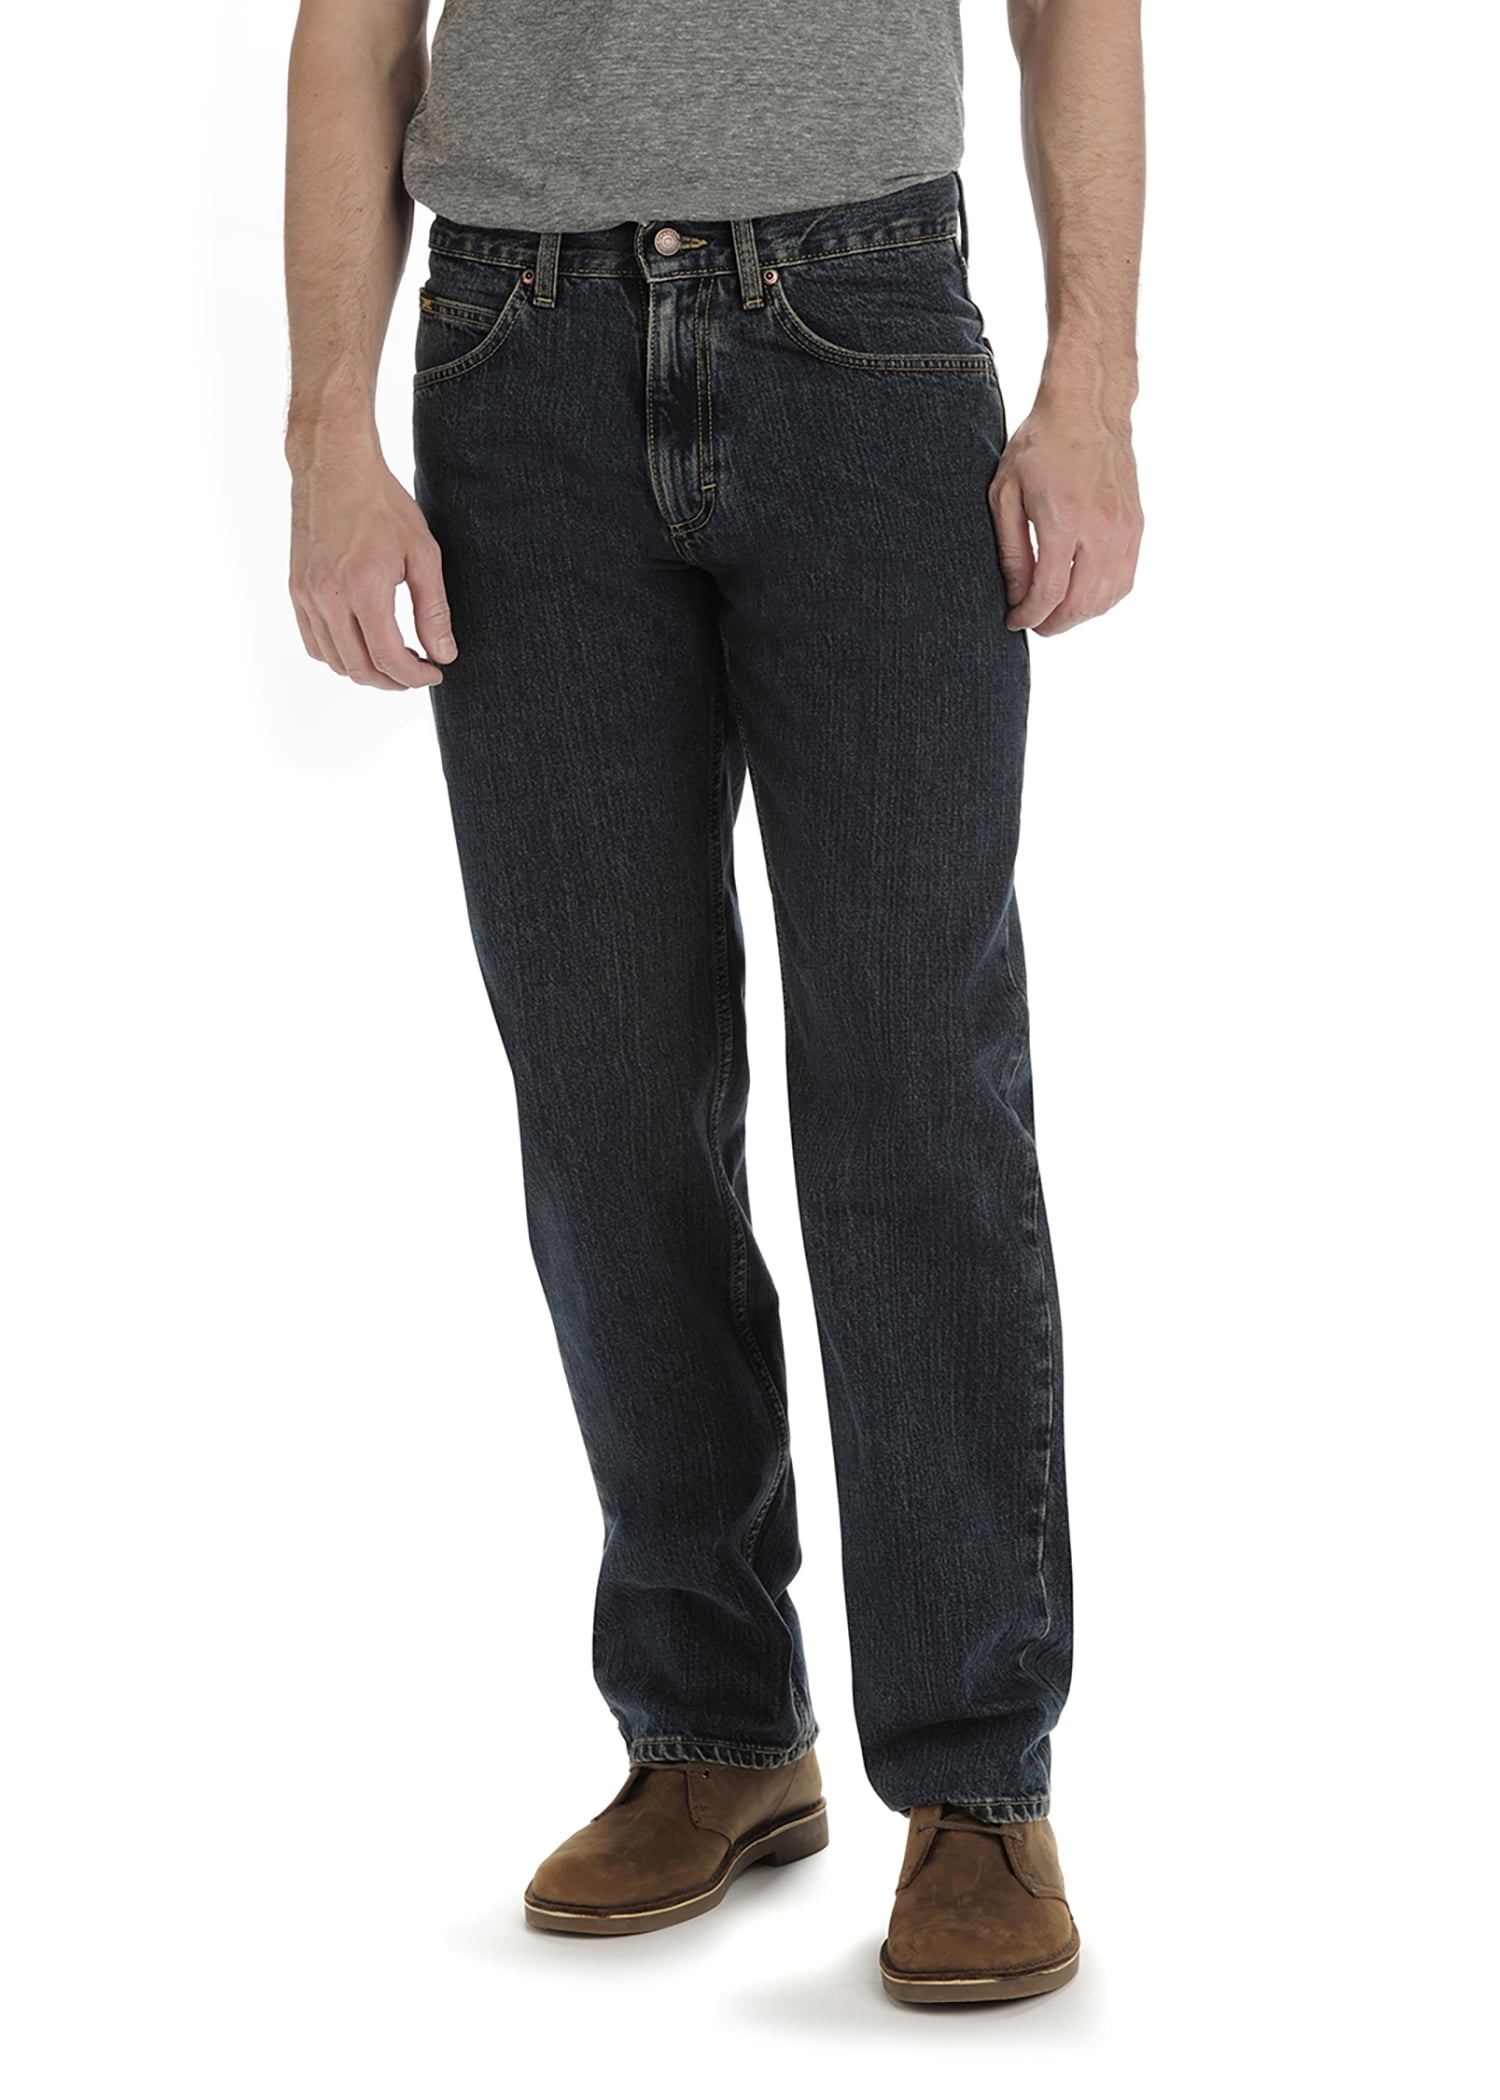 Lee Men's Relaxed Fit Straight Leg Jeans at Tractor Supply Co.